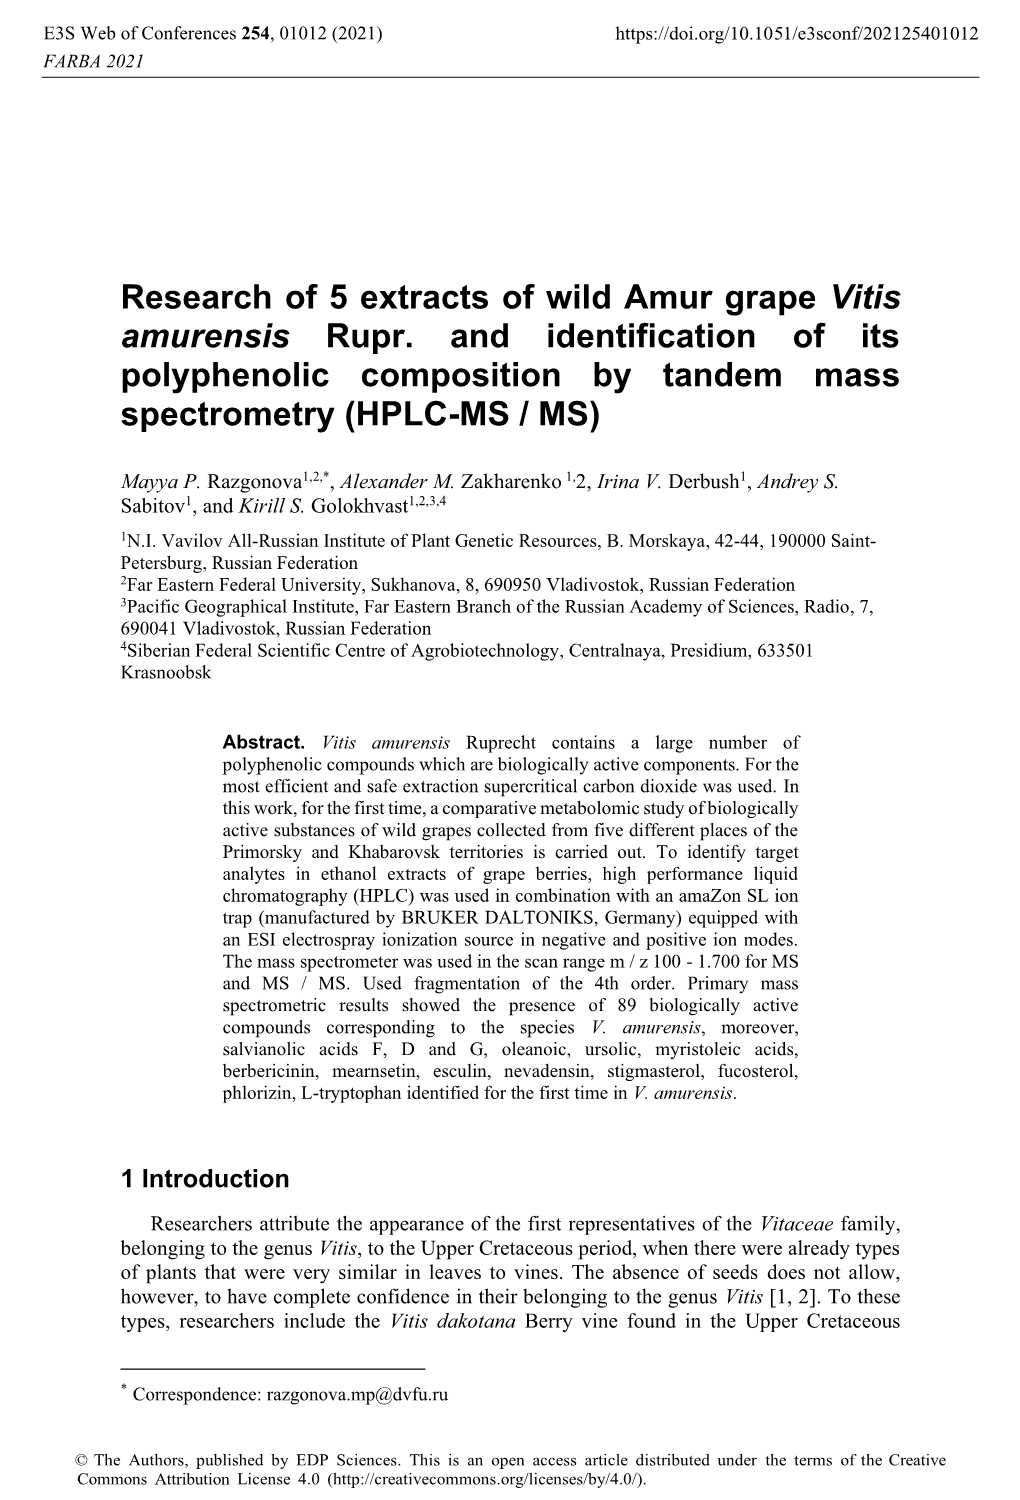 Research of 5 Extracts of Wild Amur Grape Vitis Amurensis Rupr. and Identification of Its Polyphenolic Composition by Tandem Mass Spectrometry (HPLC-MS / MS)